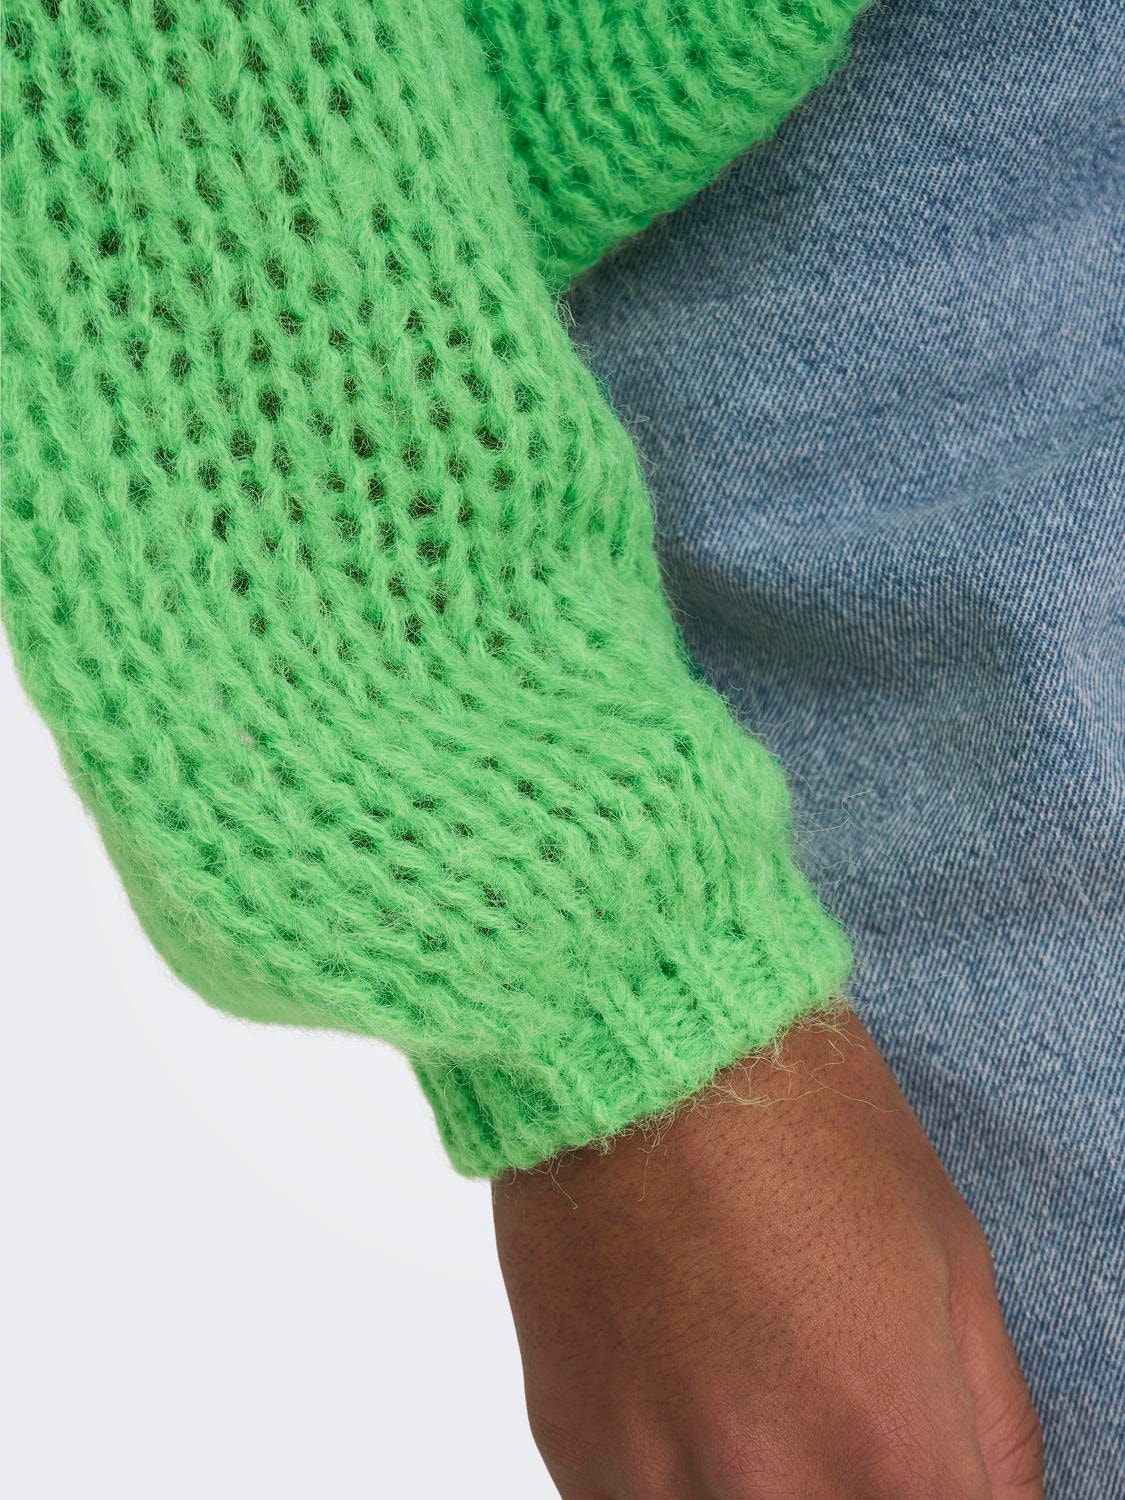 ONLY Solid colored Knitted Pullover -Summer Green - 15288895